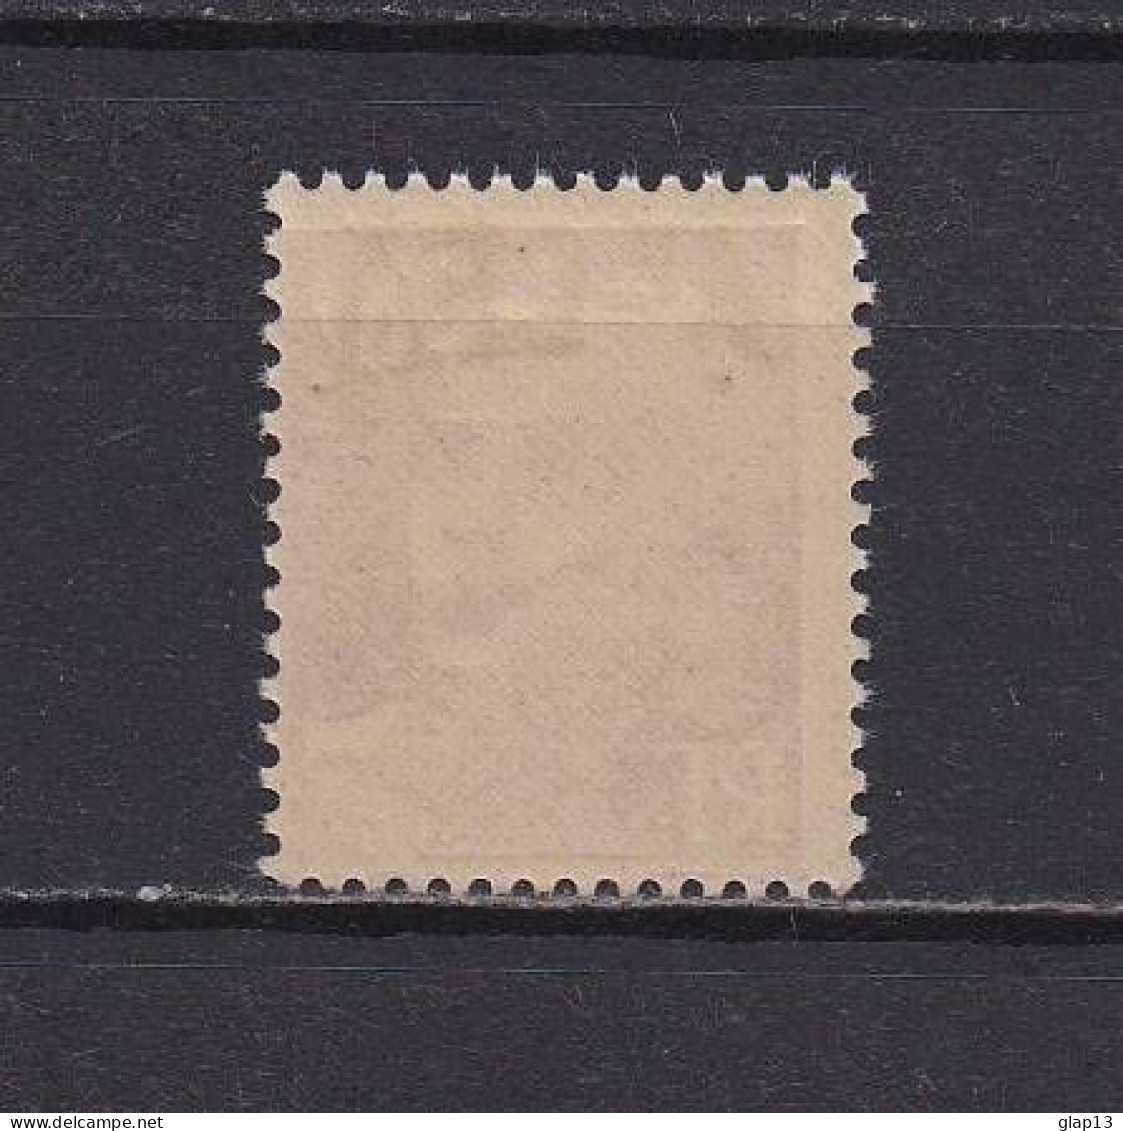 REUNION 1949 TIMBRE N°296 NEUF** MARIANNE - Unused Stamps